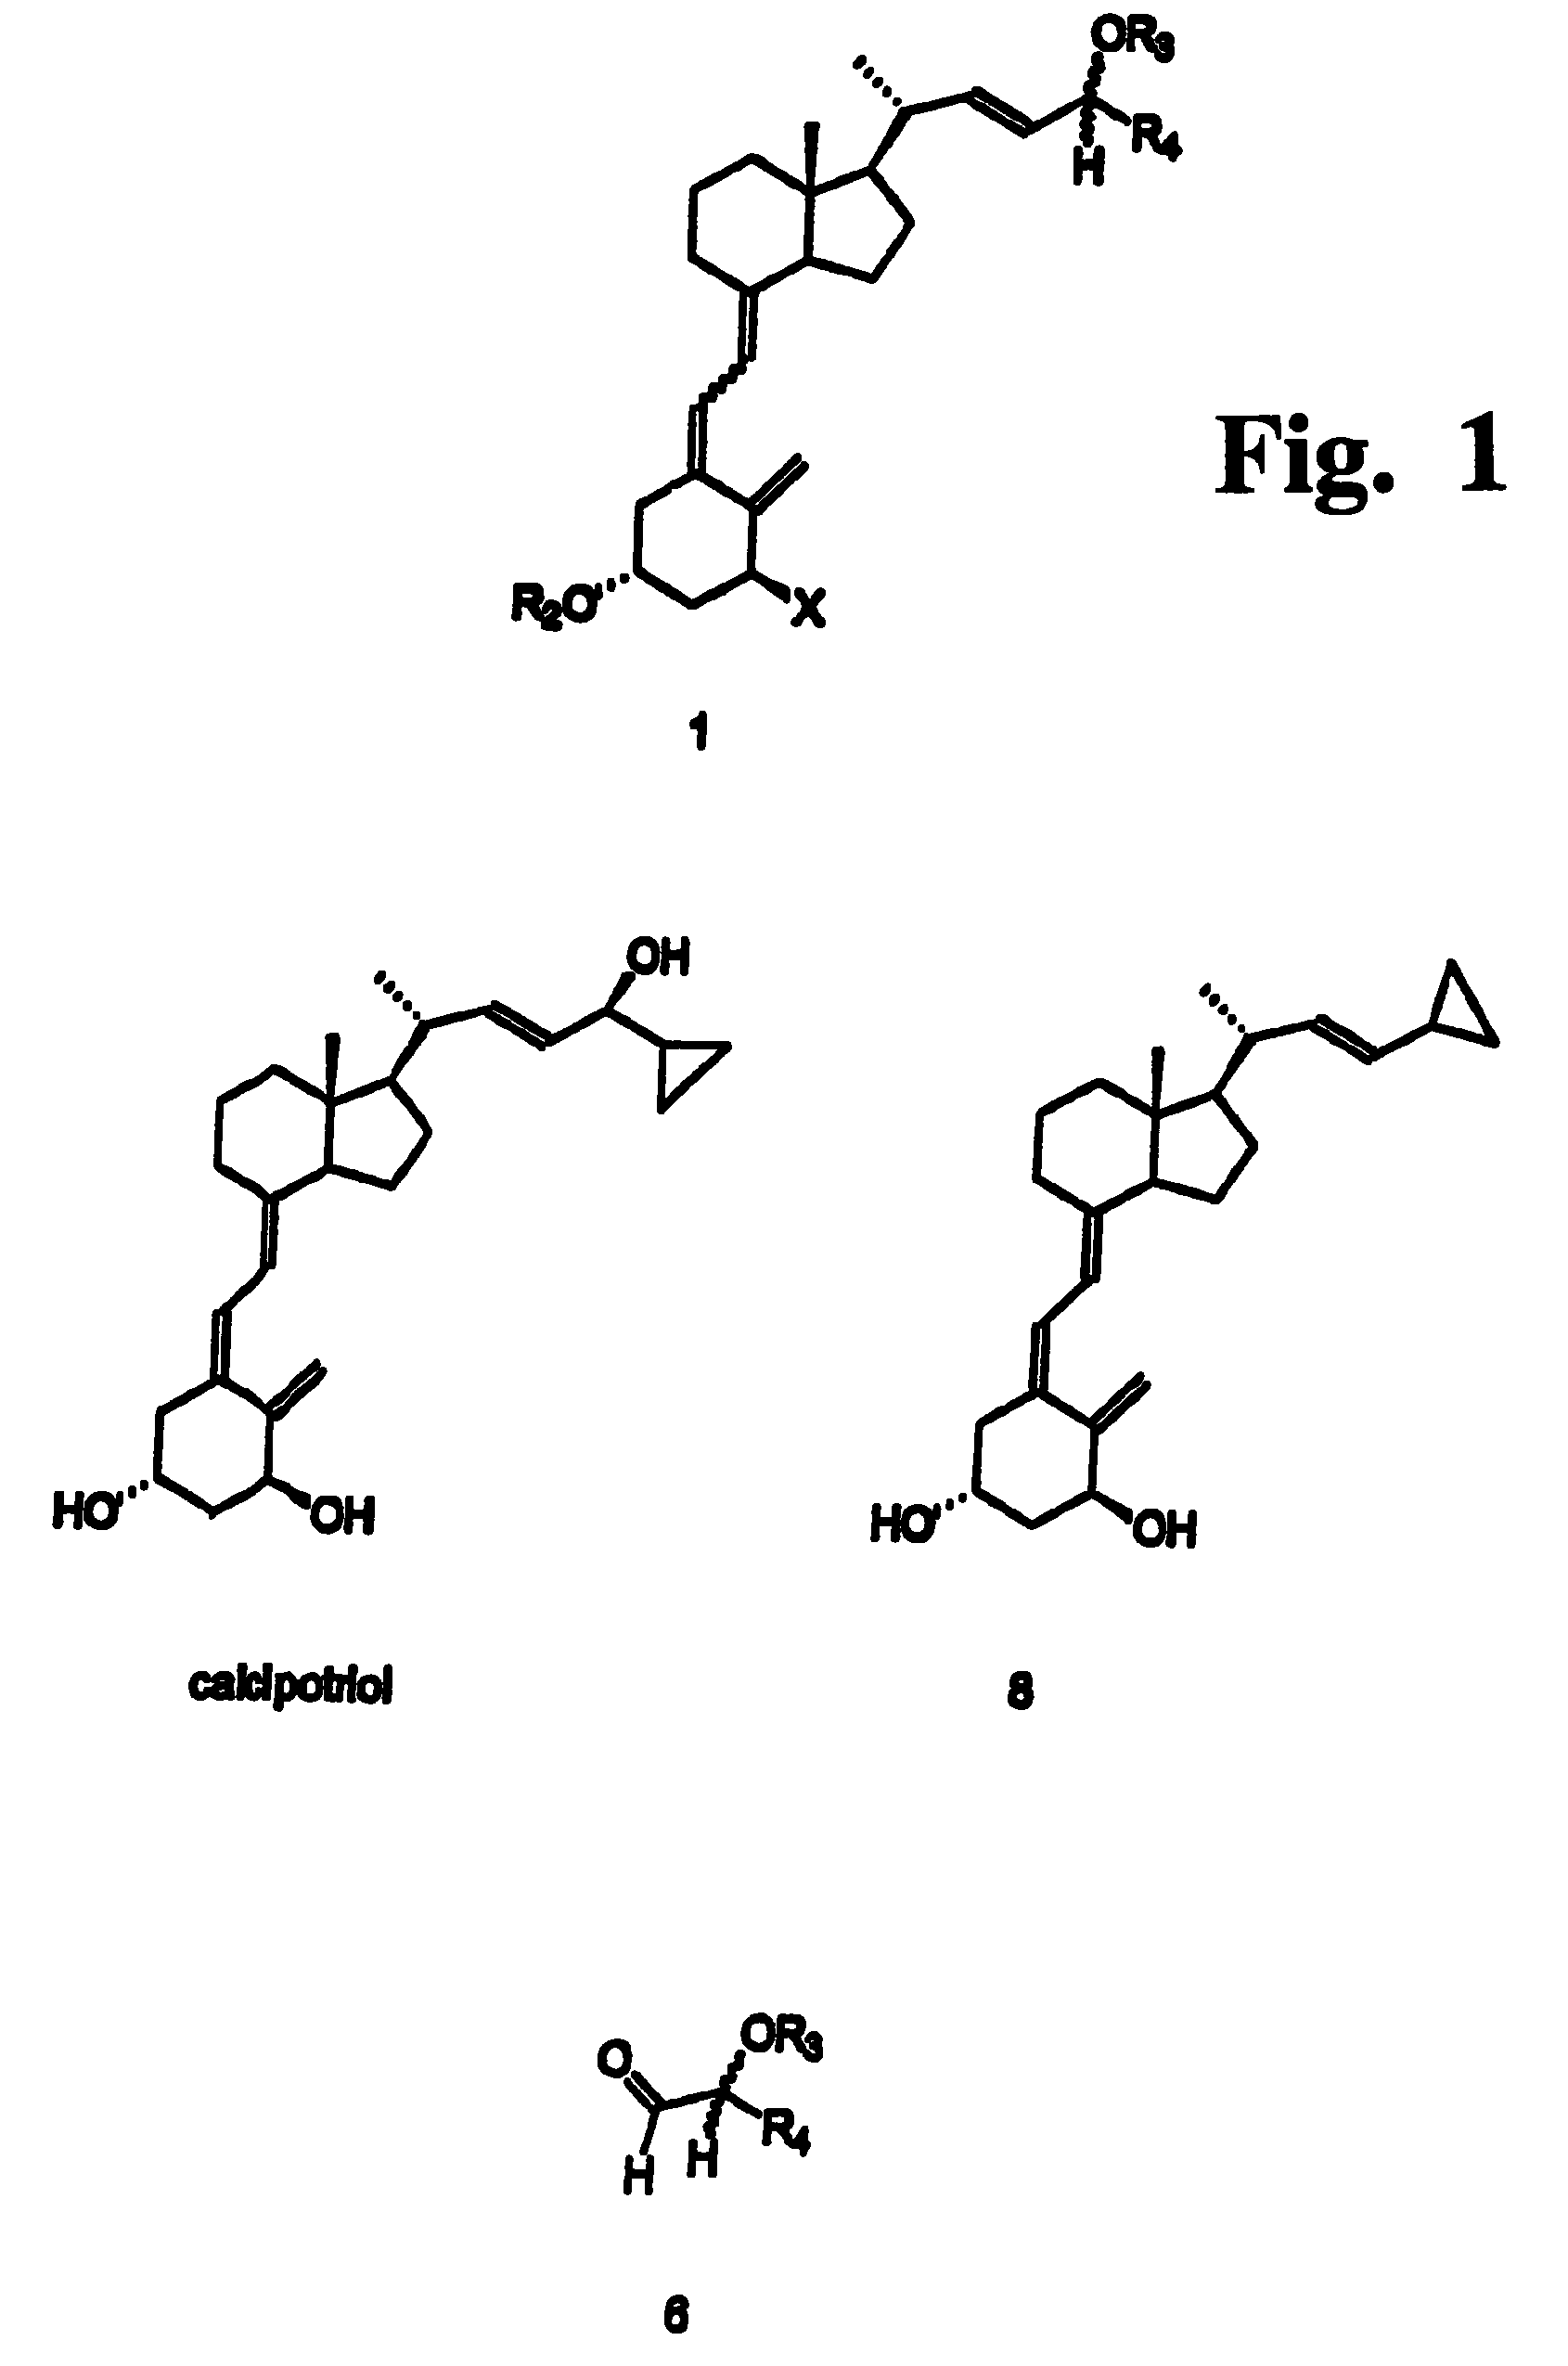 Preparation of 24 alkyl analogs of cholecalciferol and non-racemic compounds